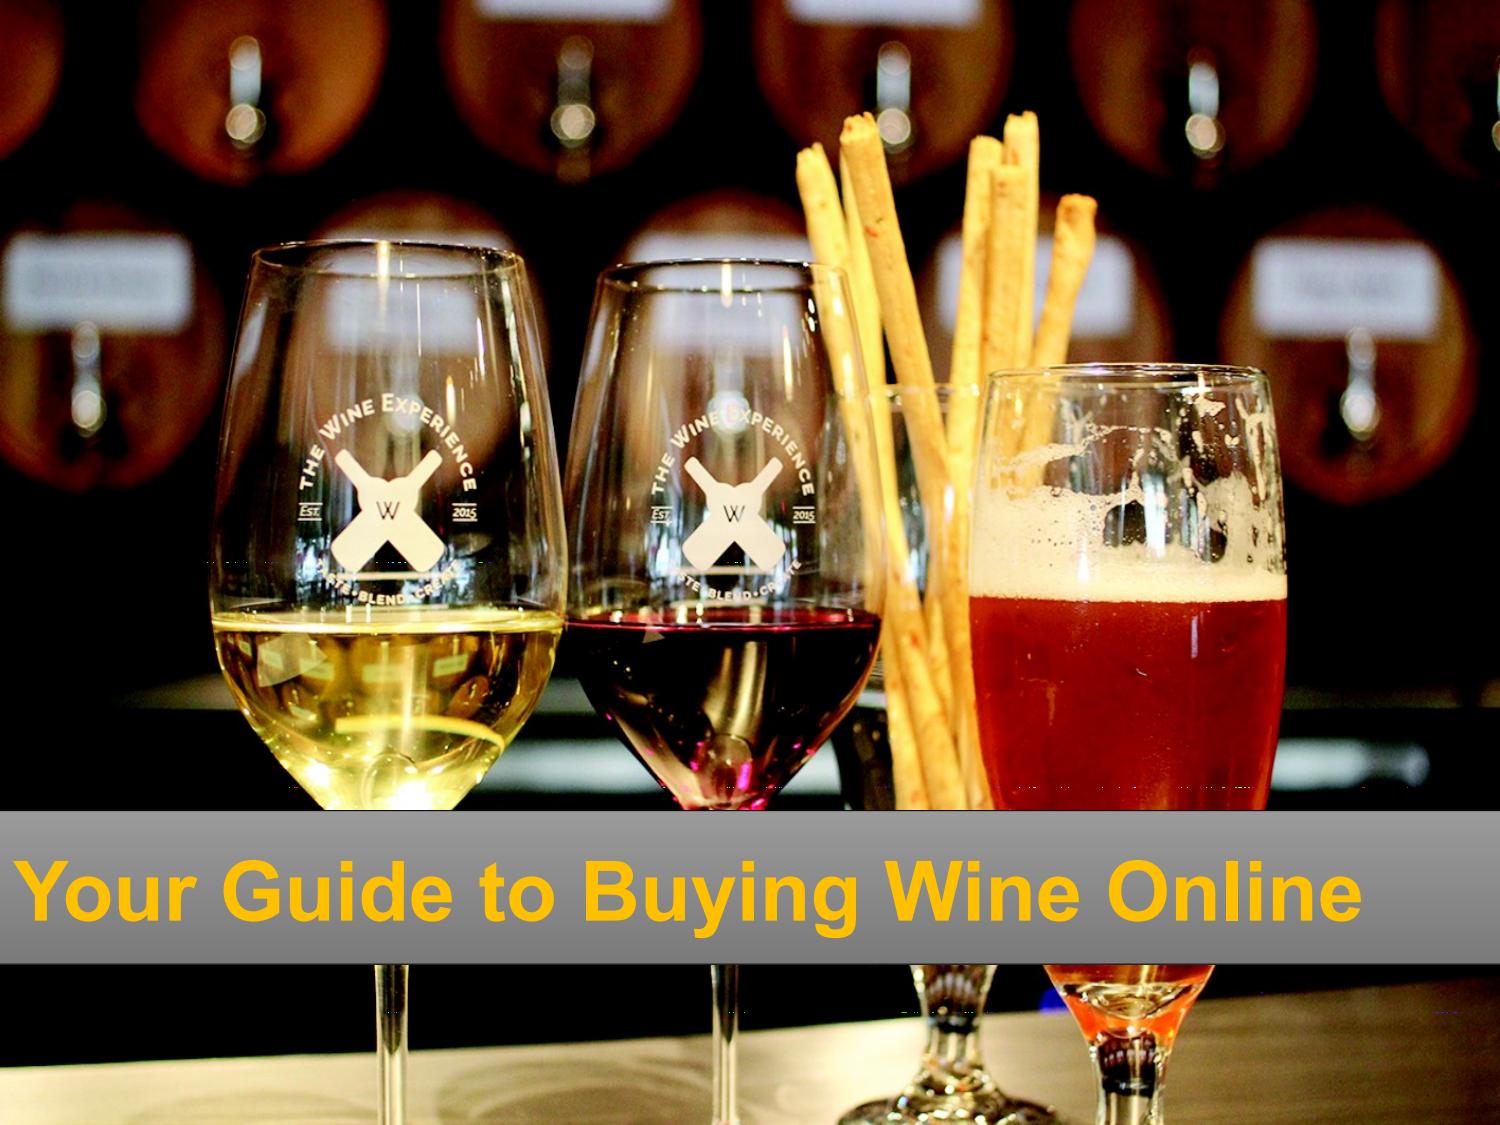 Your guide to buying wine online by thewineexperience